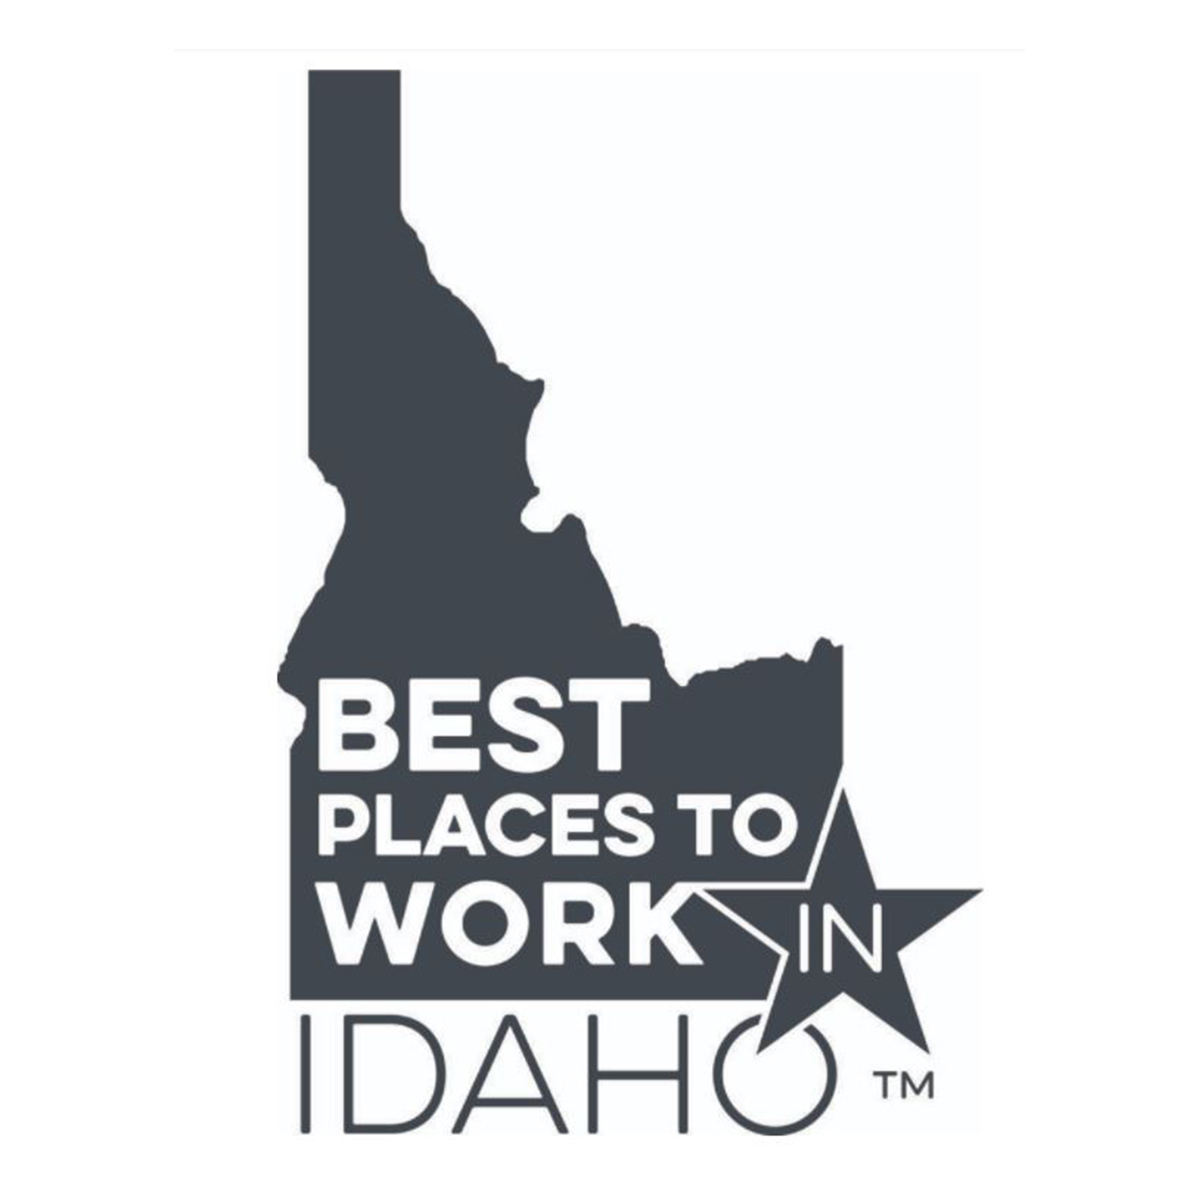 Best Places to Work in Idaho